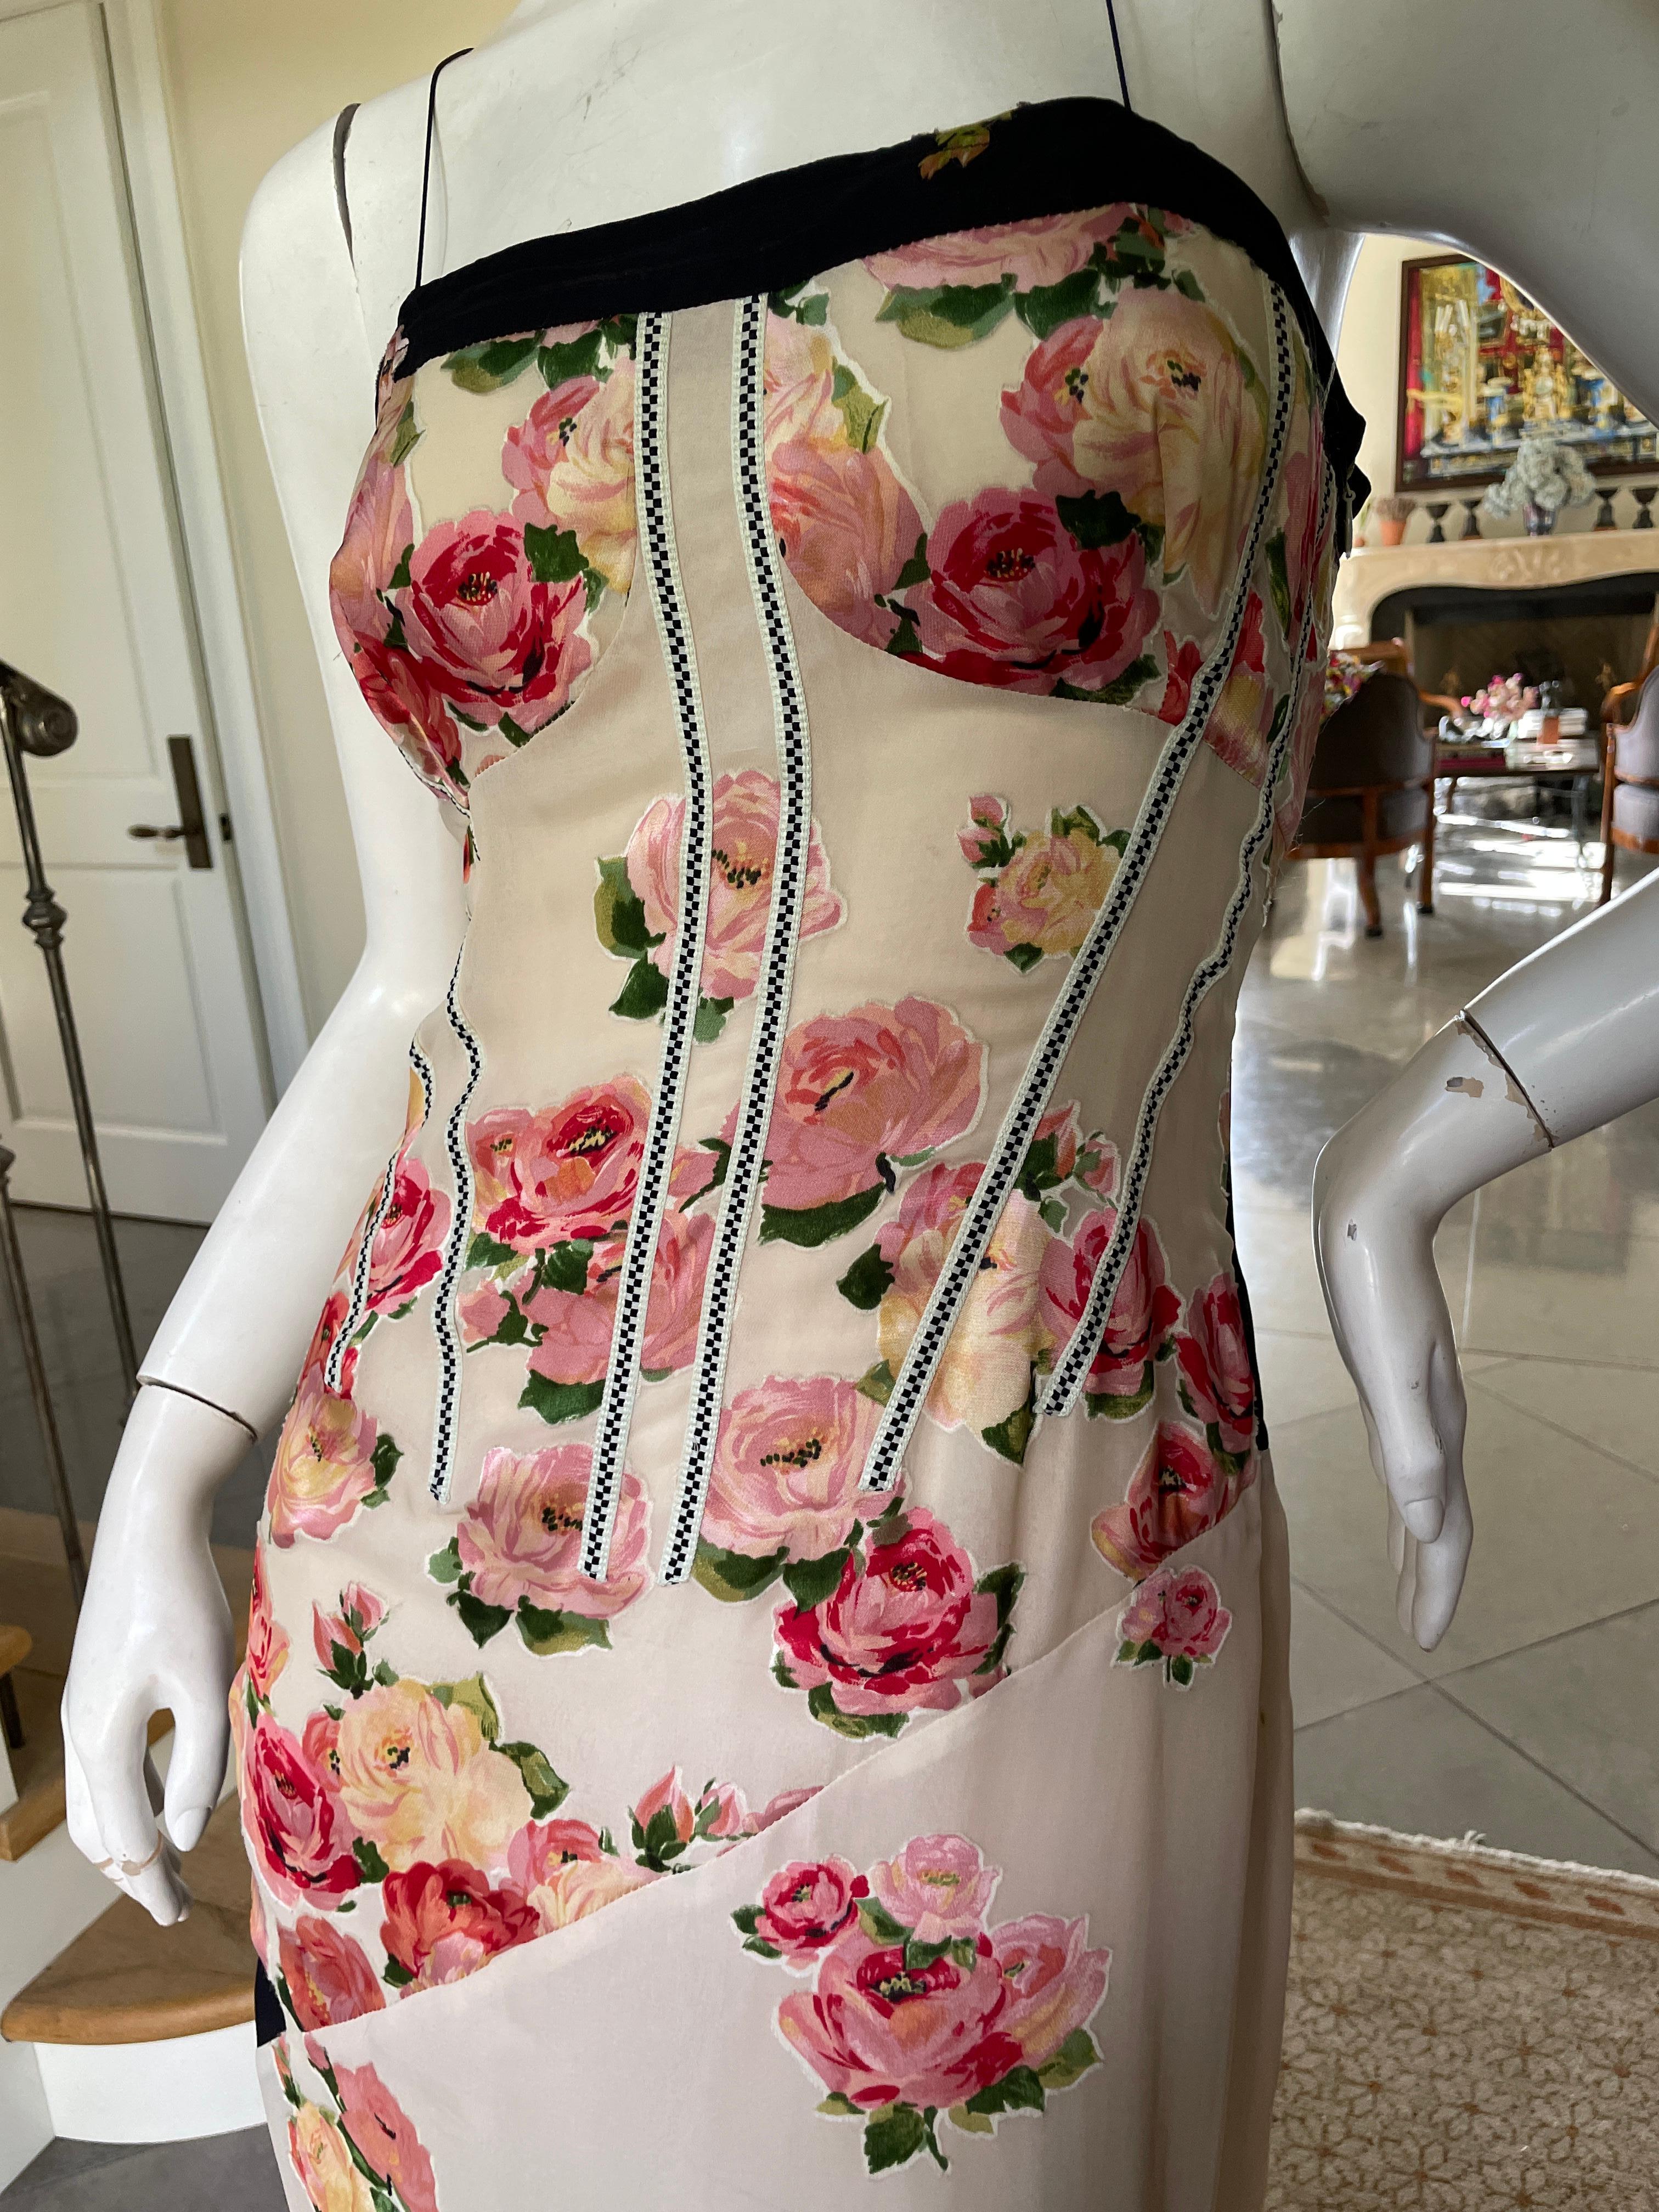 Christian Lacroix Vintage Silk Cocktail Dress with Corset Inspired Details In Excellent Condition For Sale In Cloverdale, CA